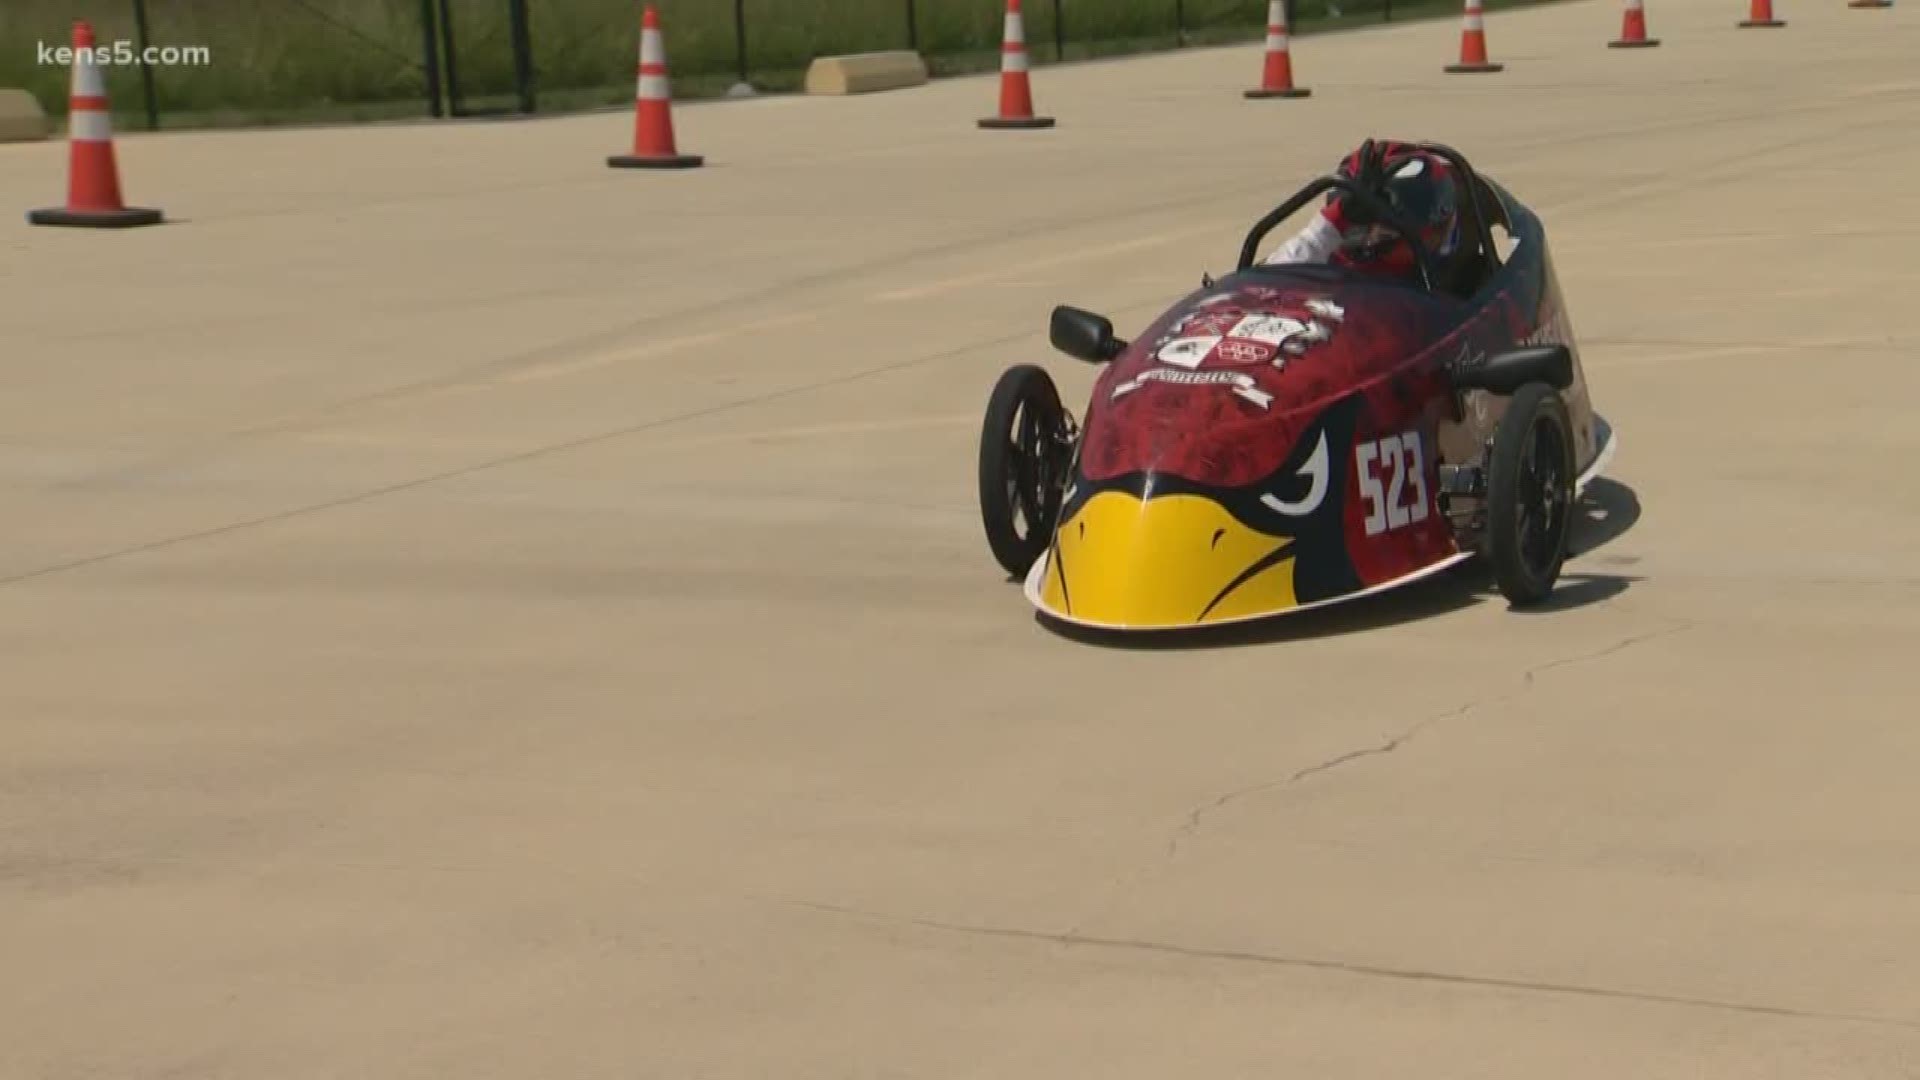 On Friday, students were encouraged to do the impossible as the Second Annual Alamo City Electrathon Race kicked off at Trader's Village.